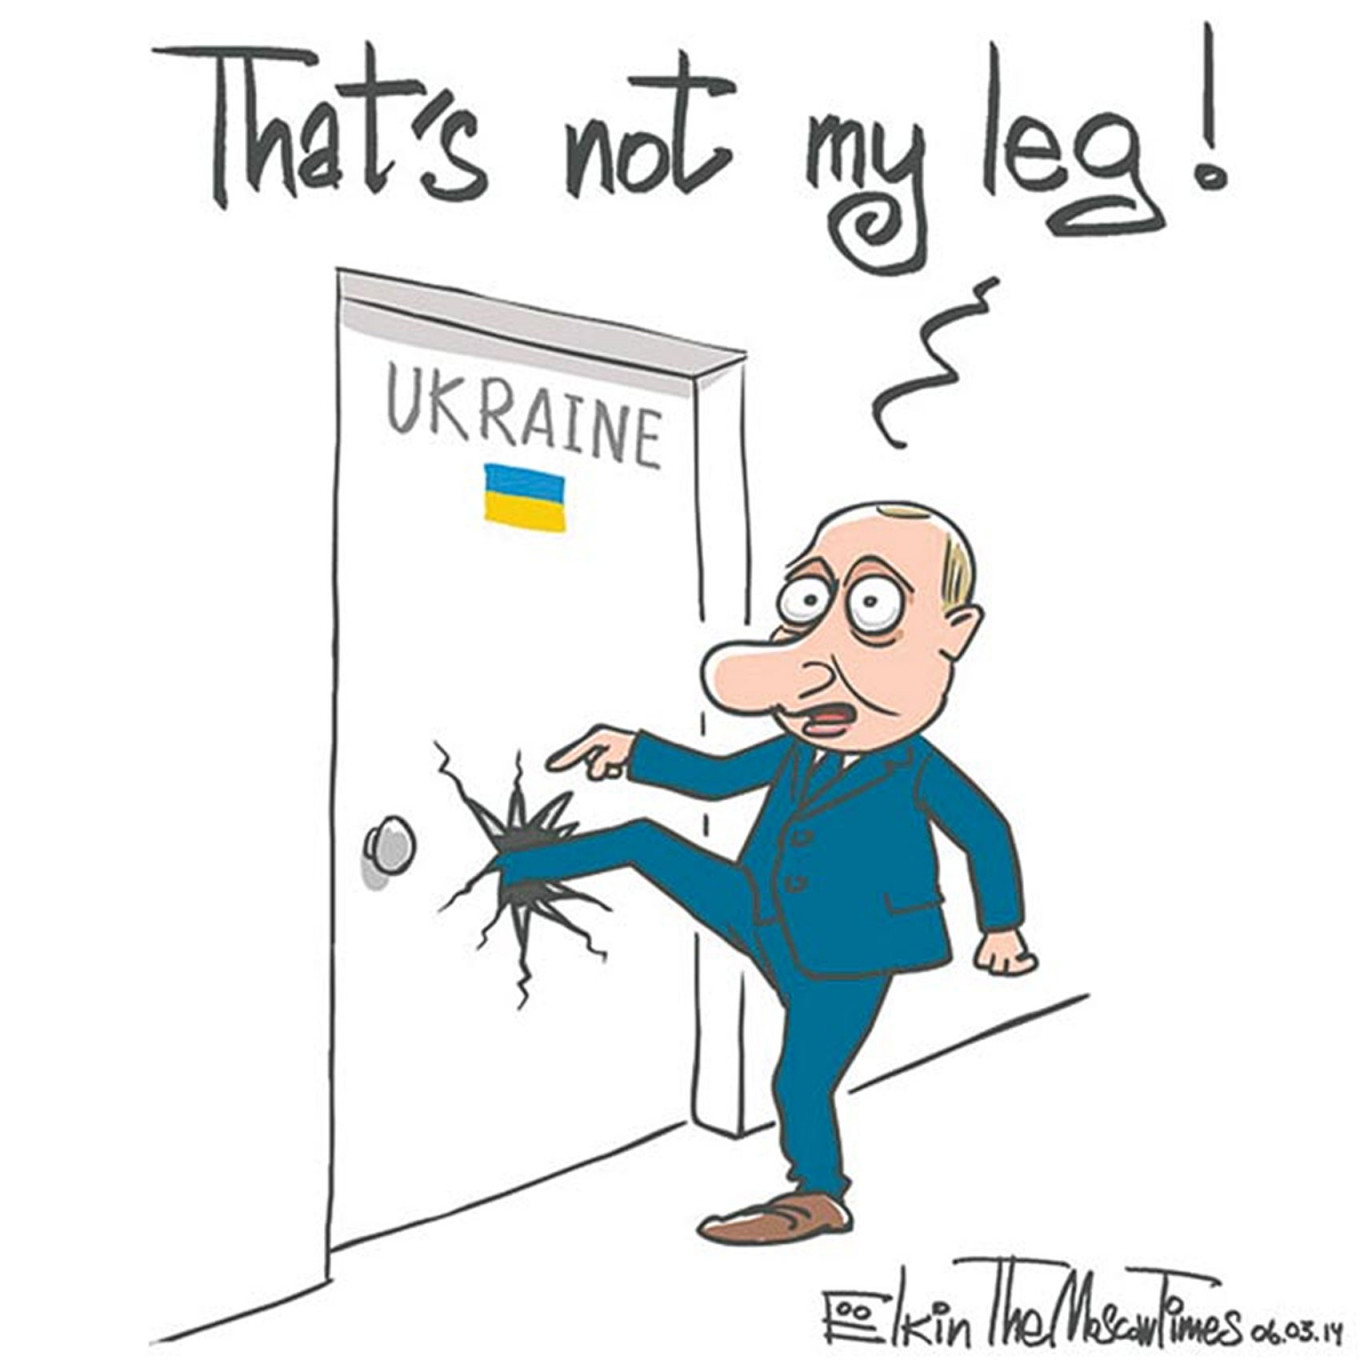 Top Political Cartoonist Sergei Elkin Flees Russia - The Moscow Times